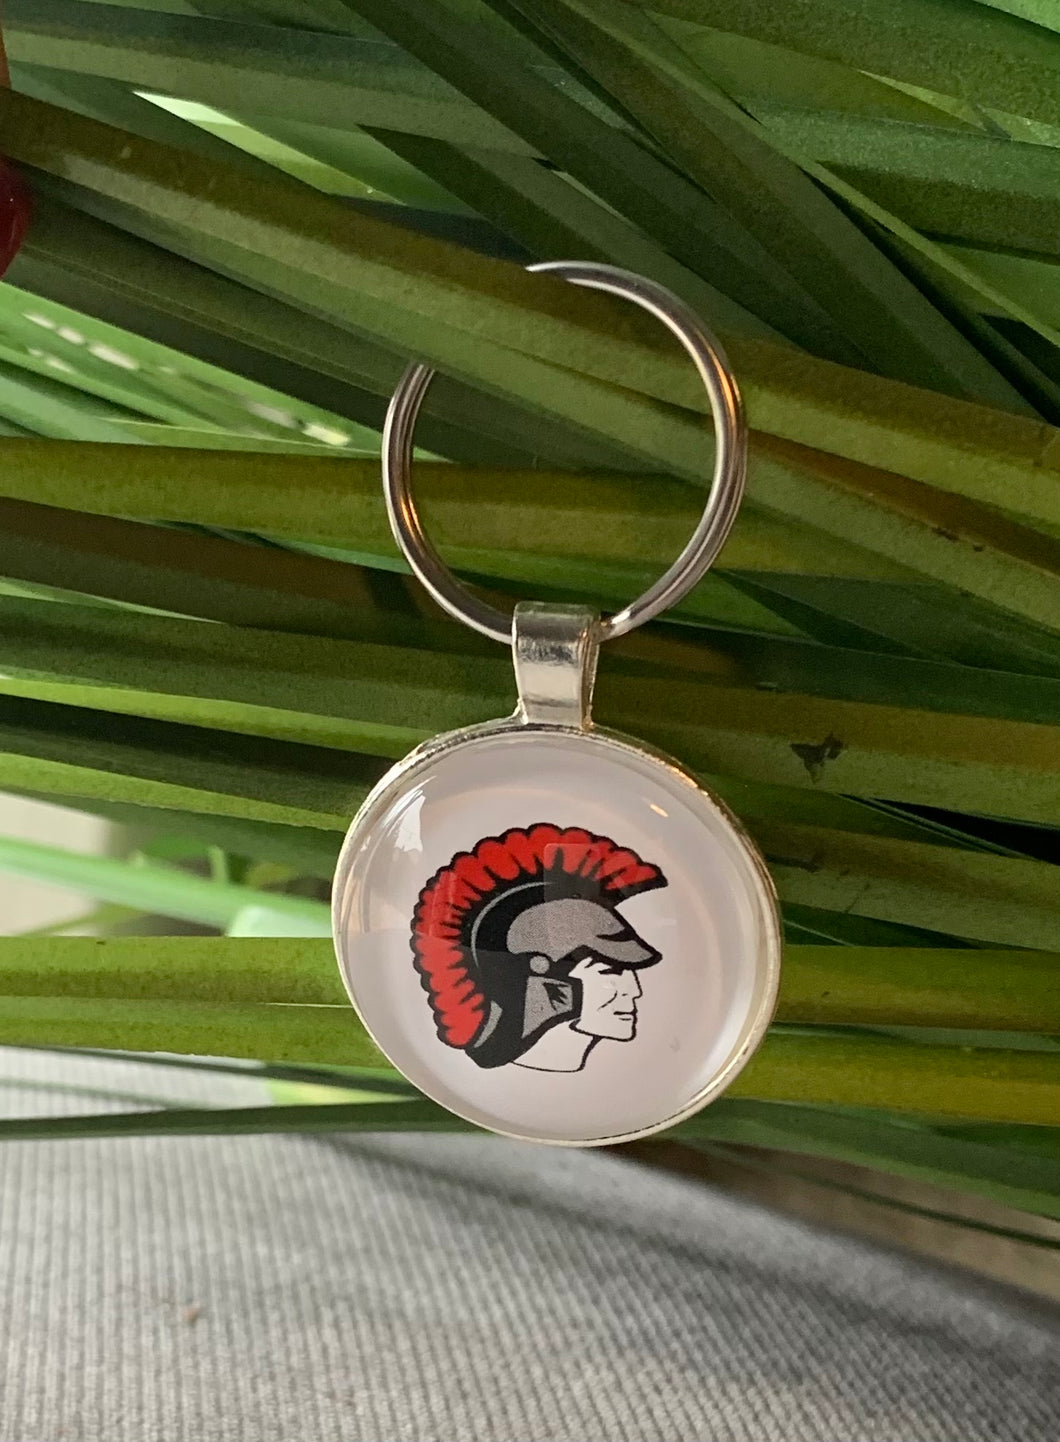 Livonia Clarenceville High School Keychain - Many Options